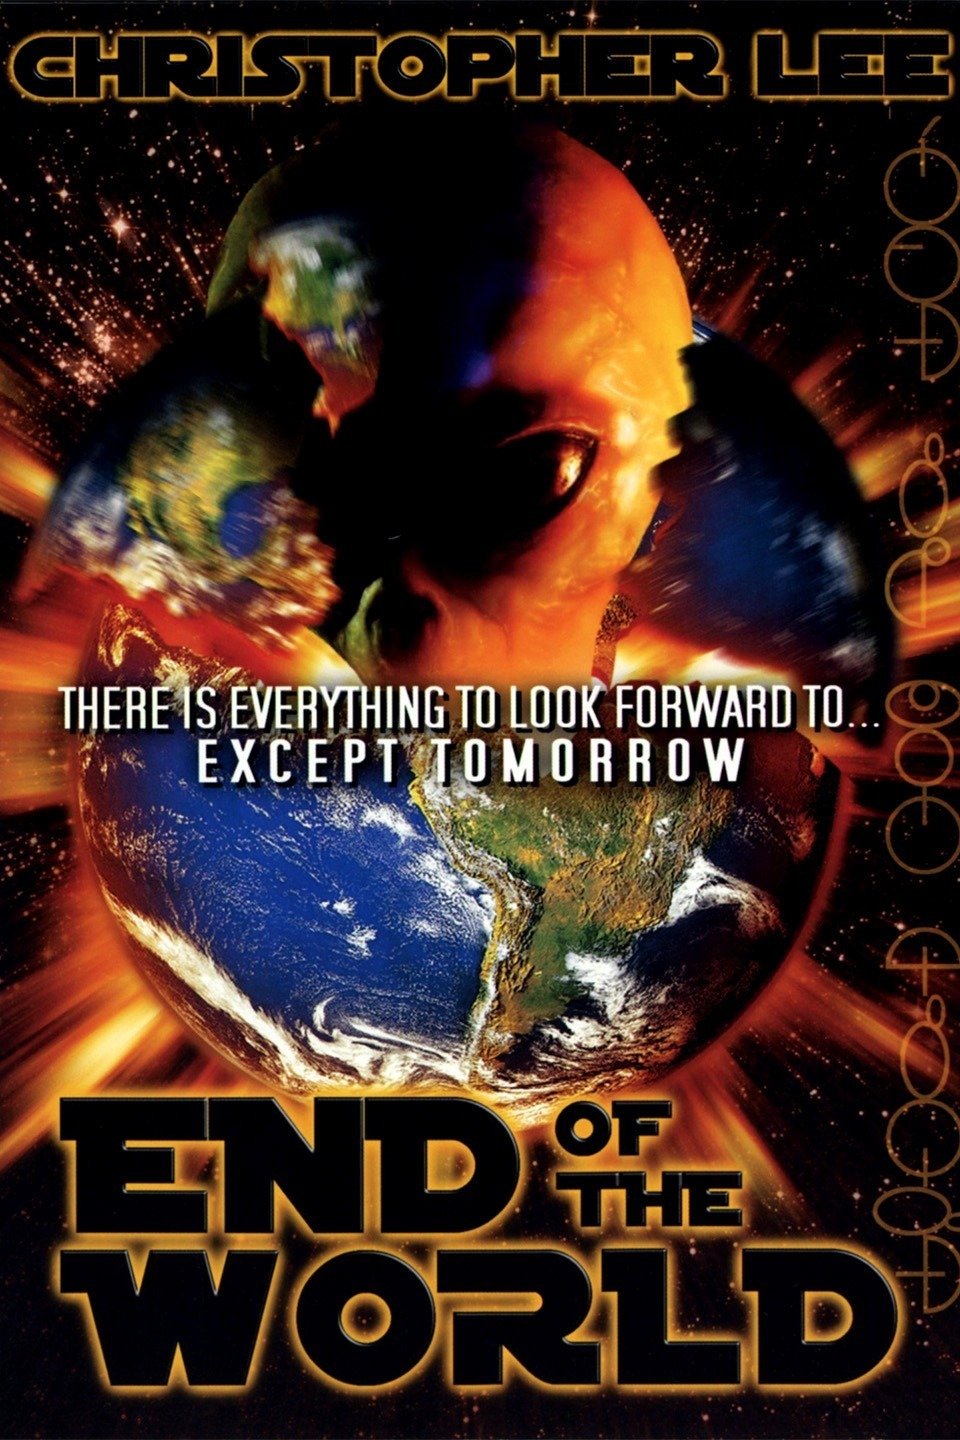 end of the world movie review